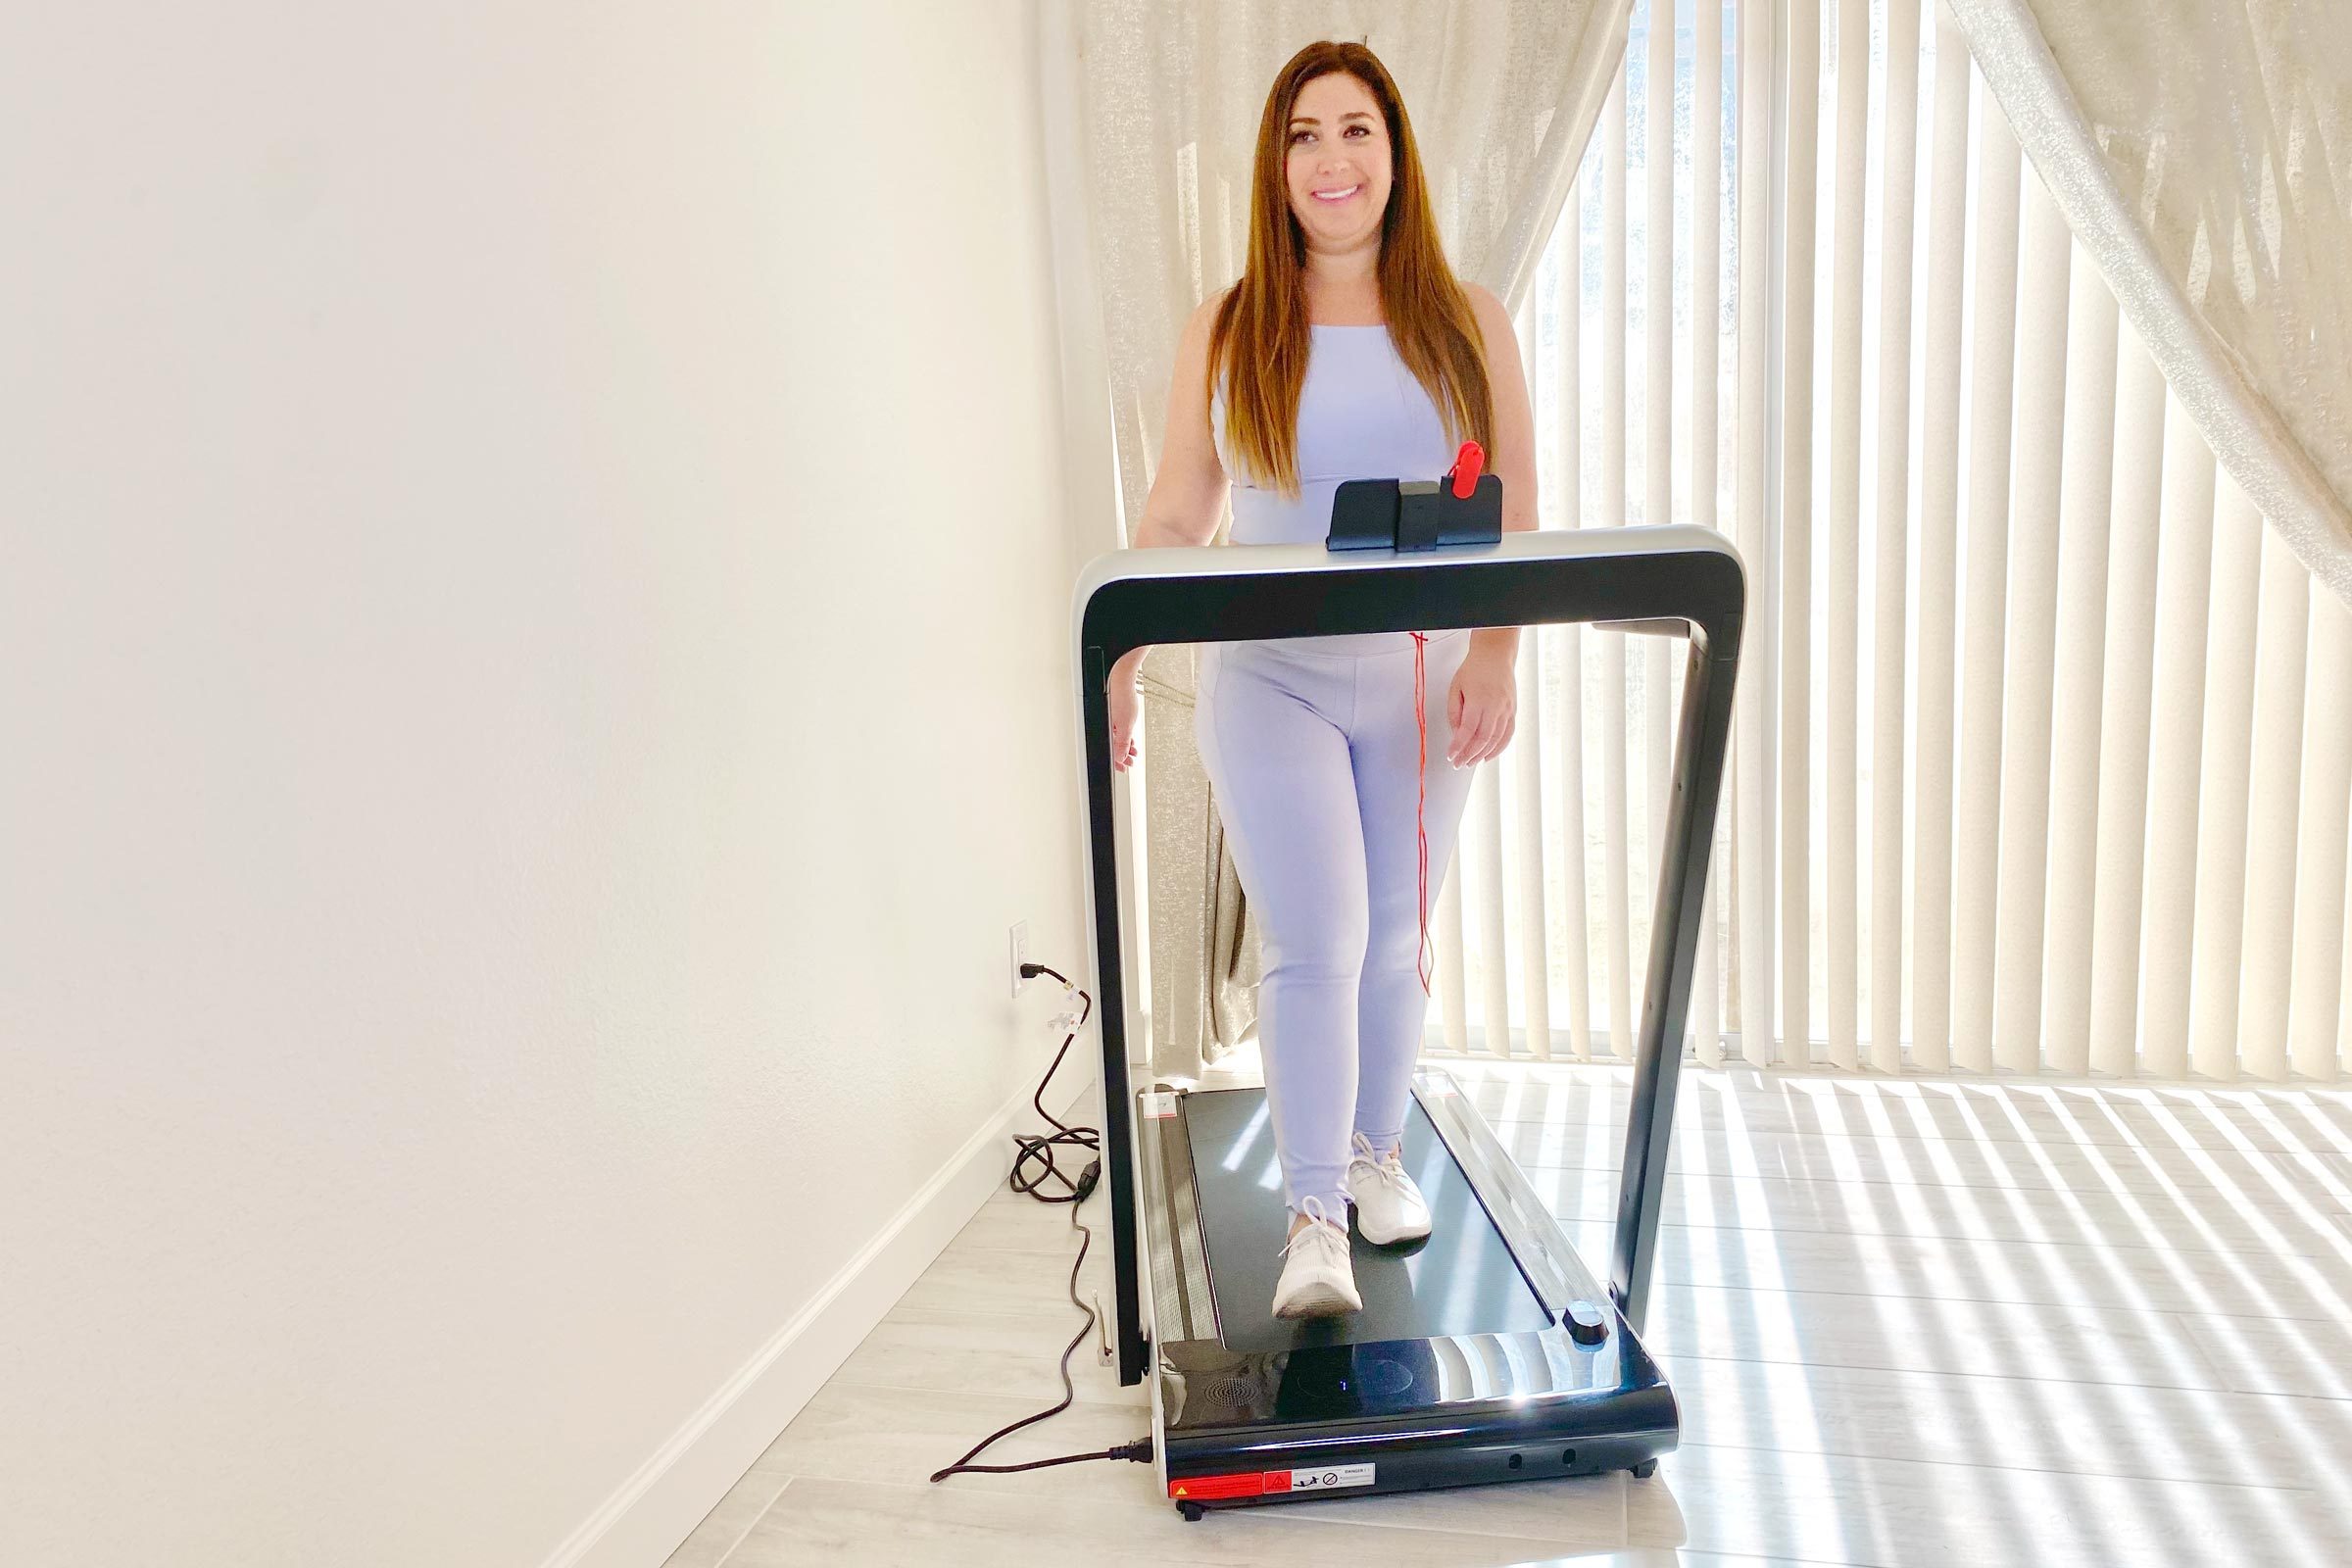 I Exercised With an Under-Desk Treadmill—Here Are My Honest Thoughts